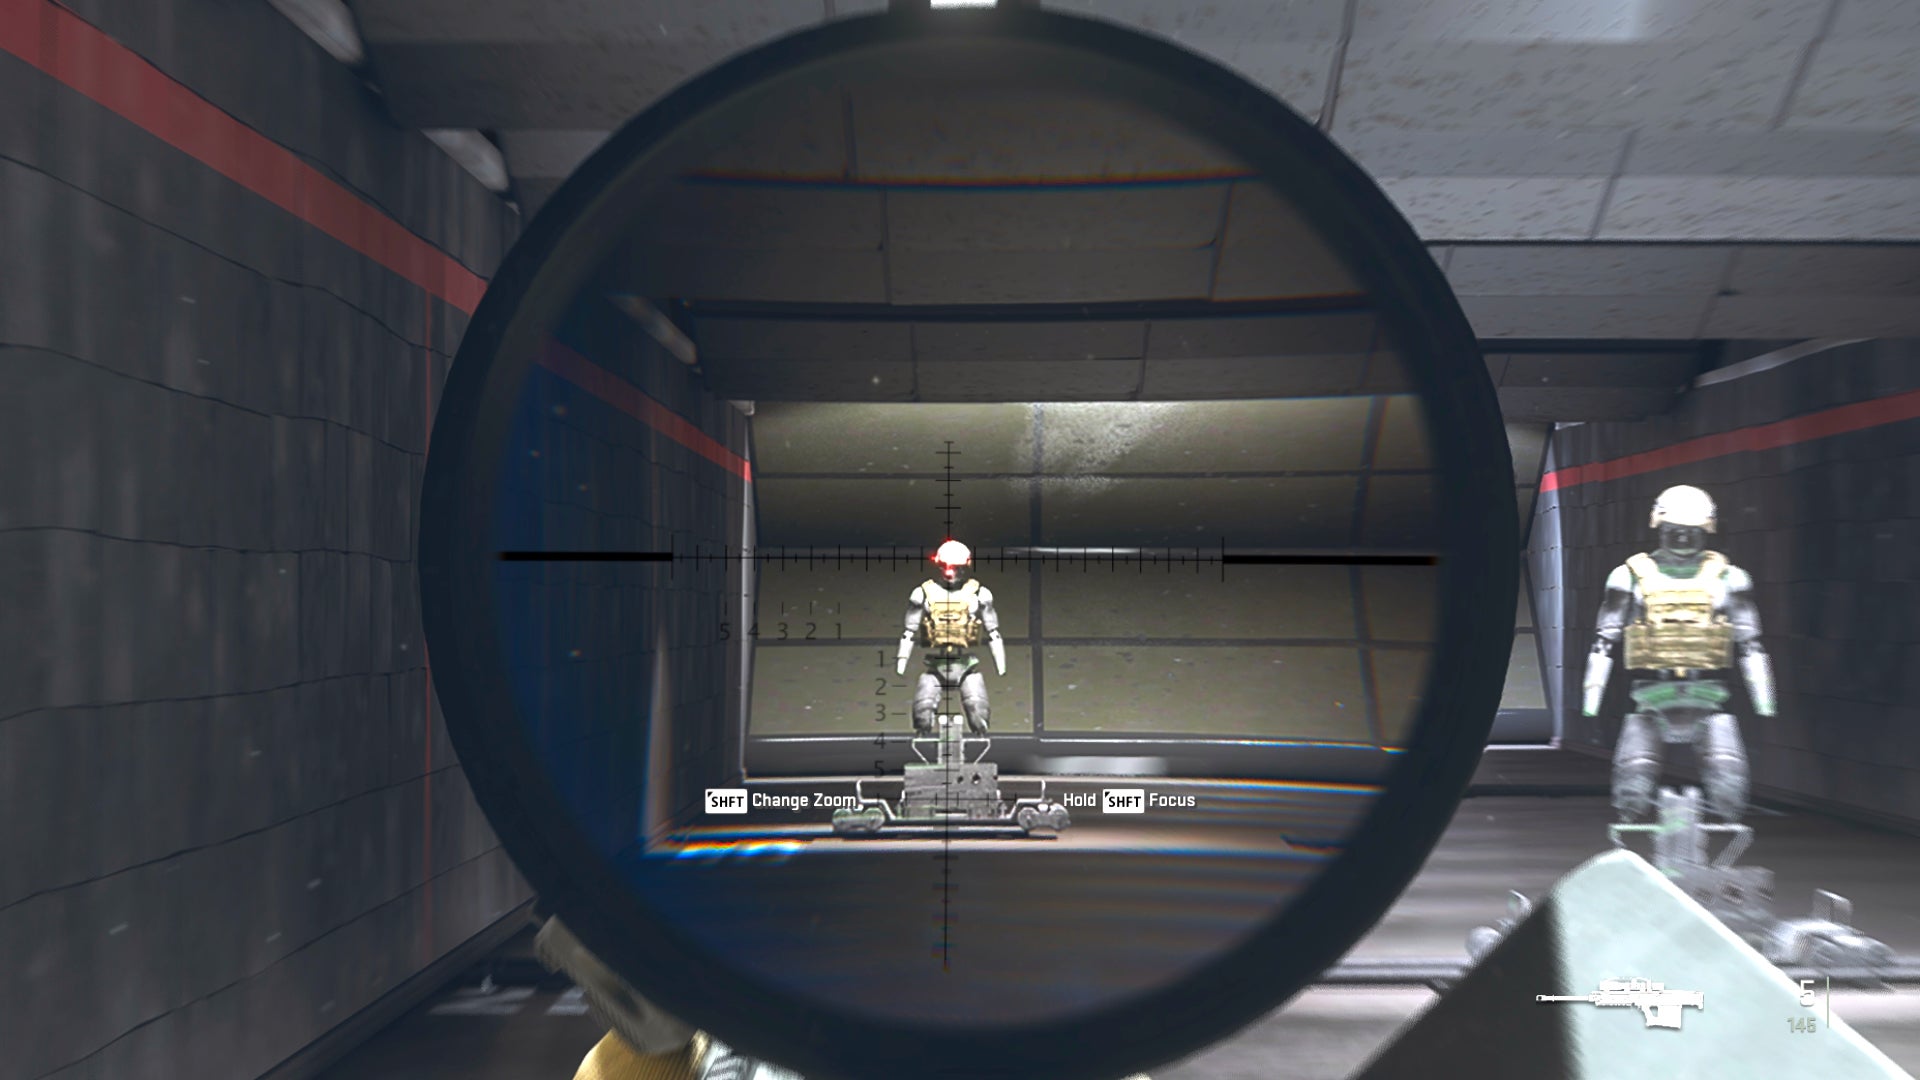 The player in Warzone 2.0 aims at a training dummy with the Signal 50 default scope.